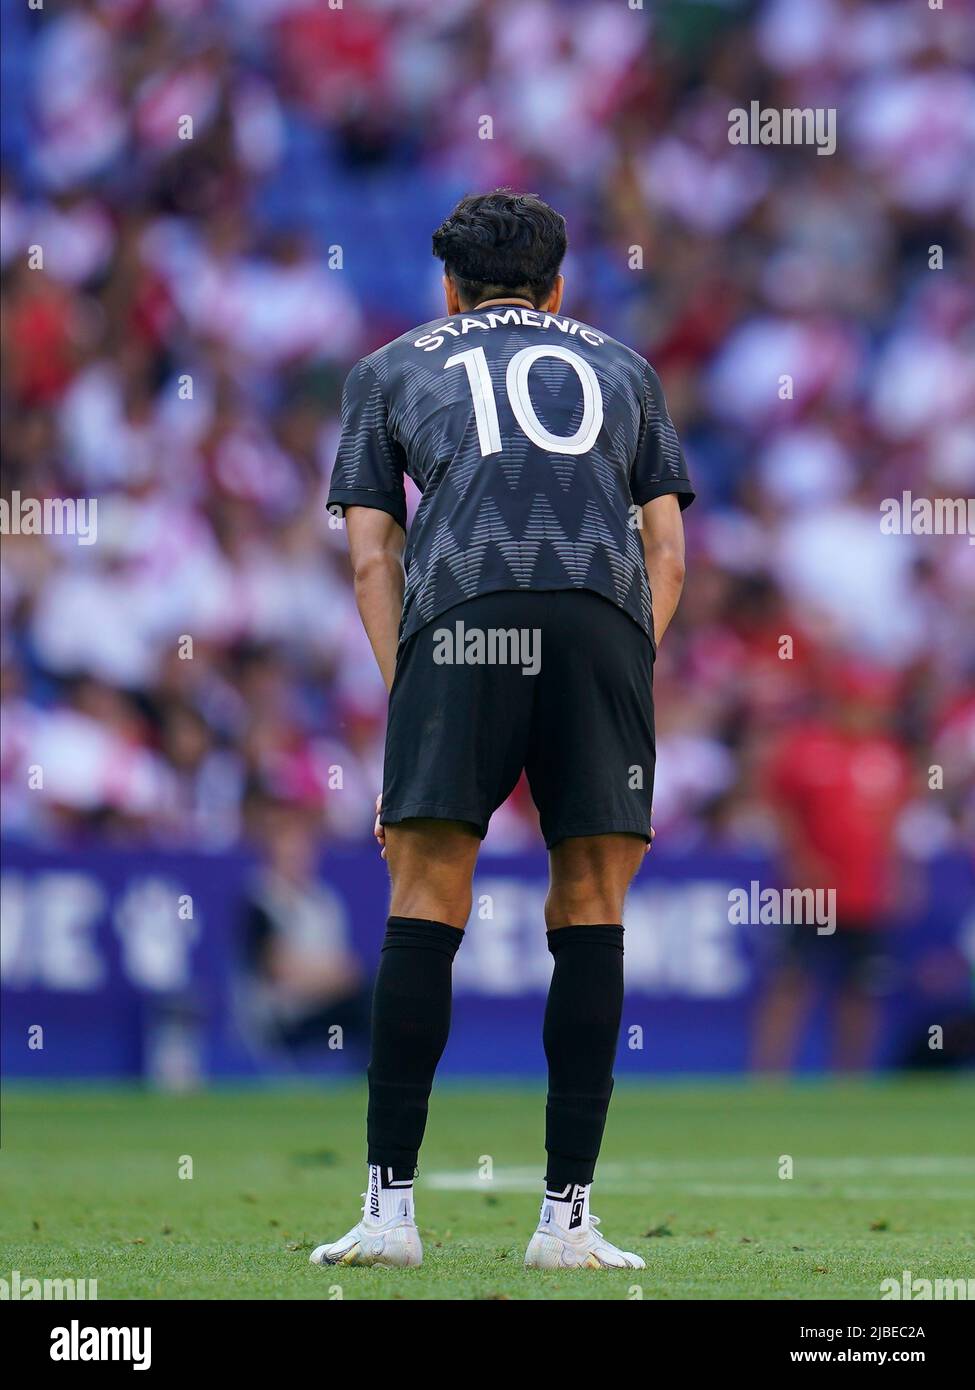 Barcelona, Spain. June 5, 2022, Marlo Stamenic of New Zealand during the friendly match between Peru and New Zealand played at RCDE Stadium on June 5, 2022 in Barcelona, Spain. (Photo by Bagu Blanco / PRESSINPHOTO) Stock Photo